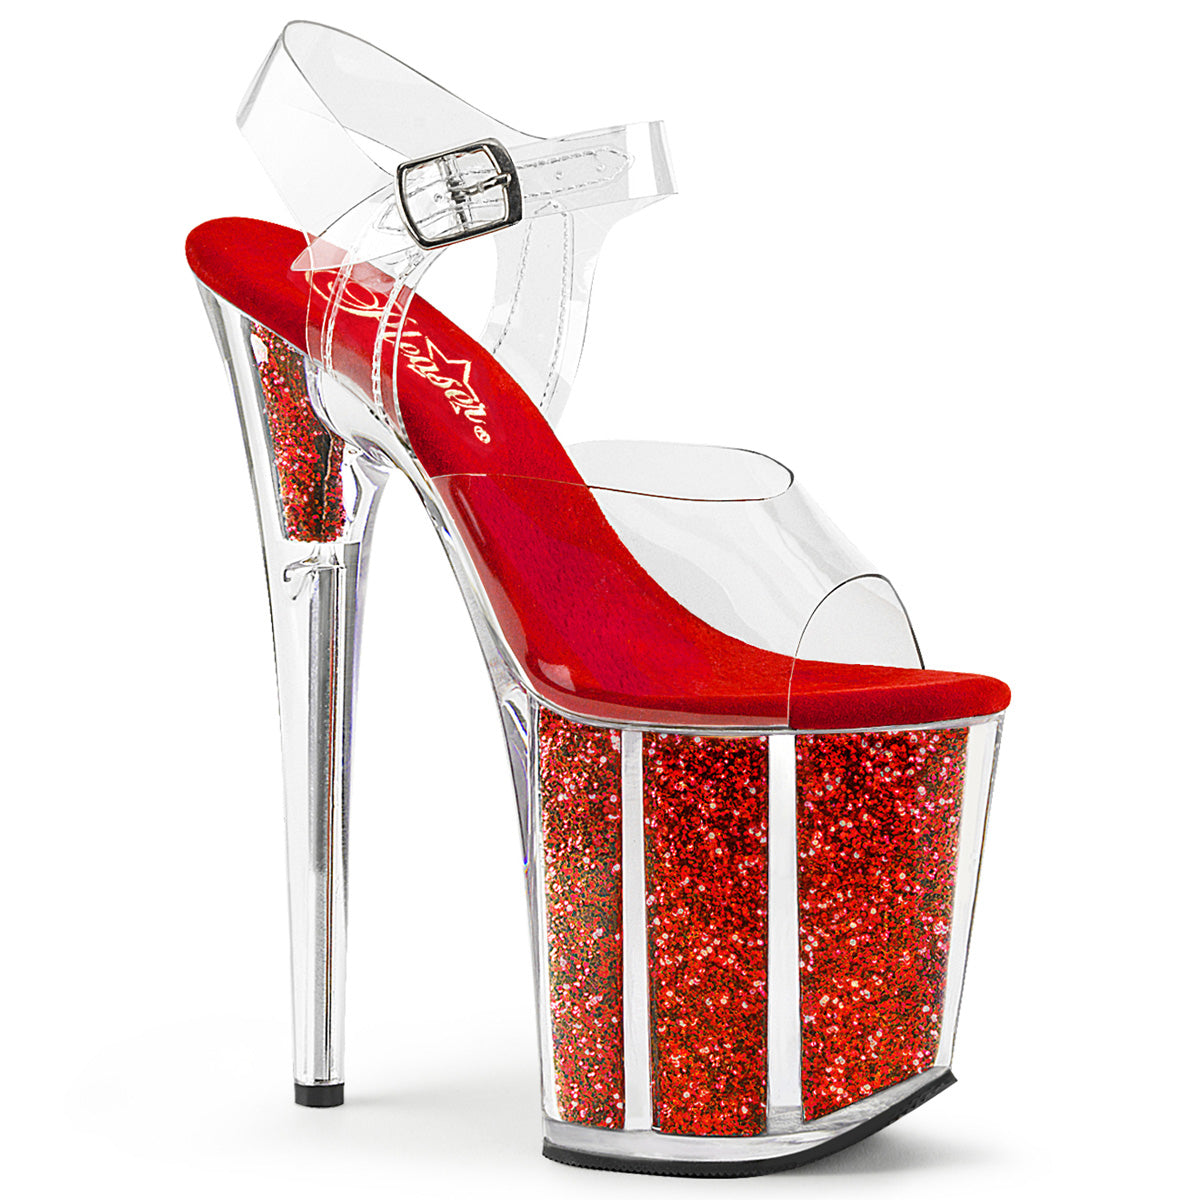 FLAMINGO-808G Ankle Peep Toe High Heel Red & Clear Multi view 1